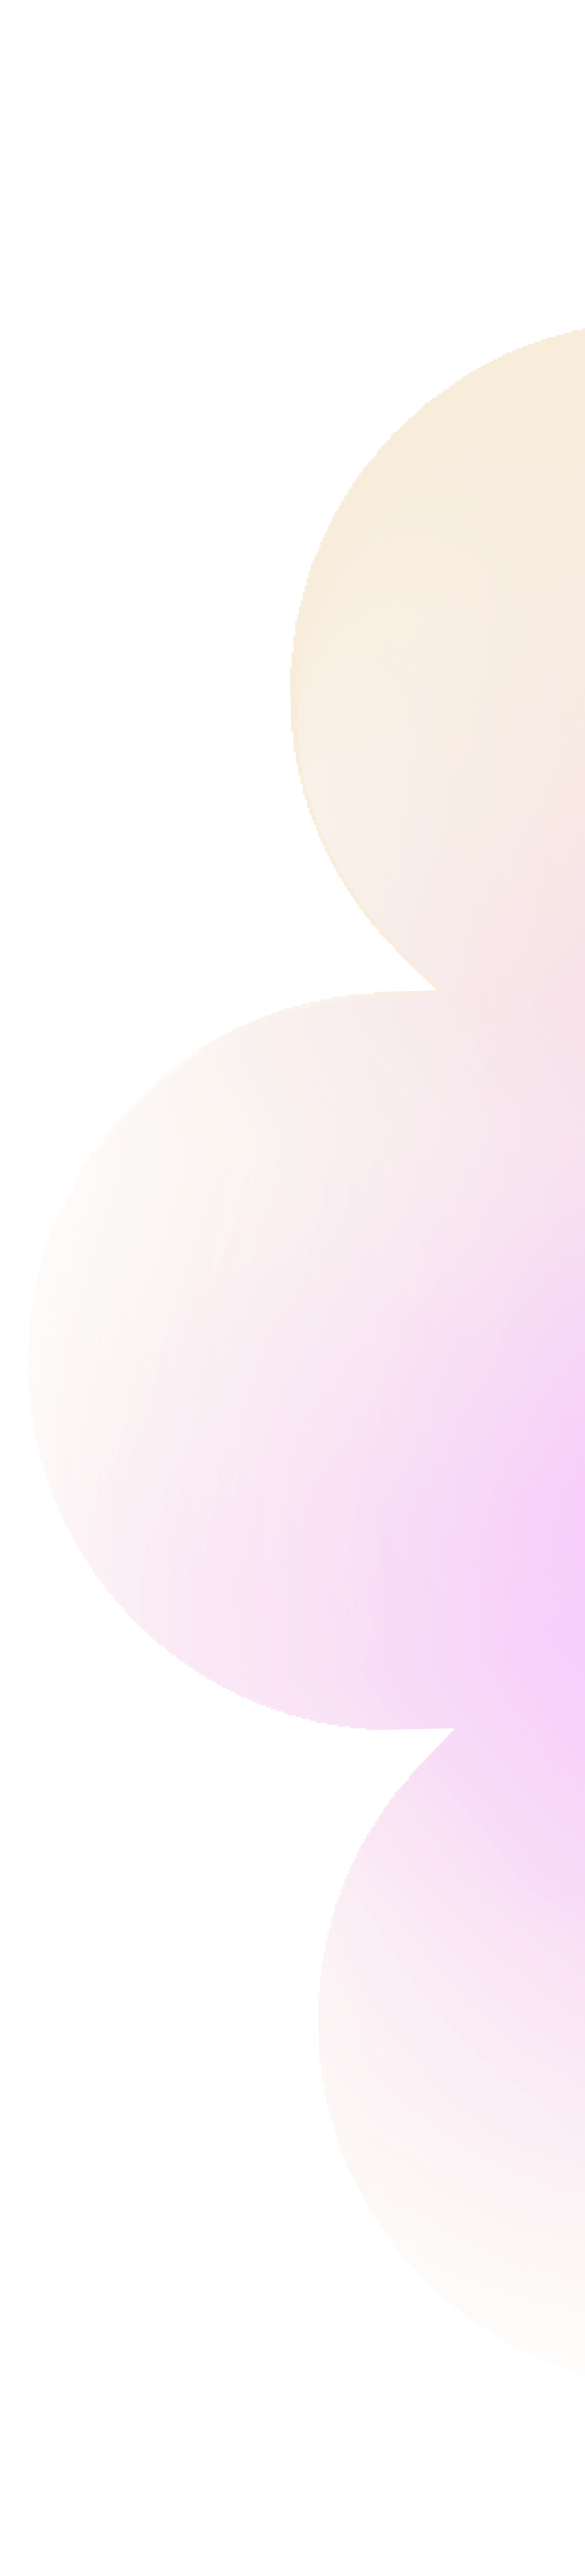 Oranges pink meshes